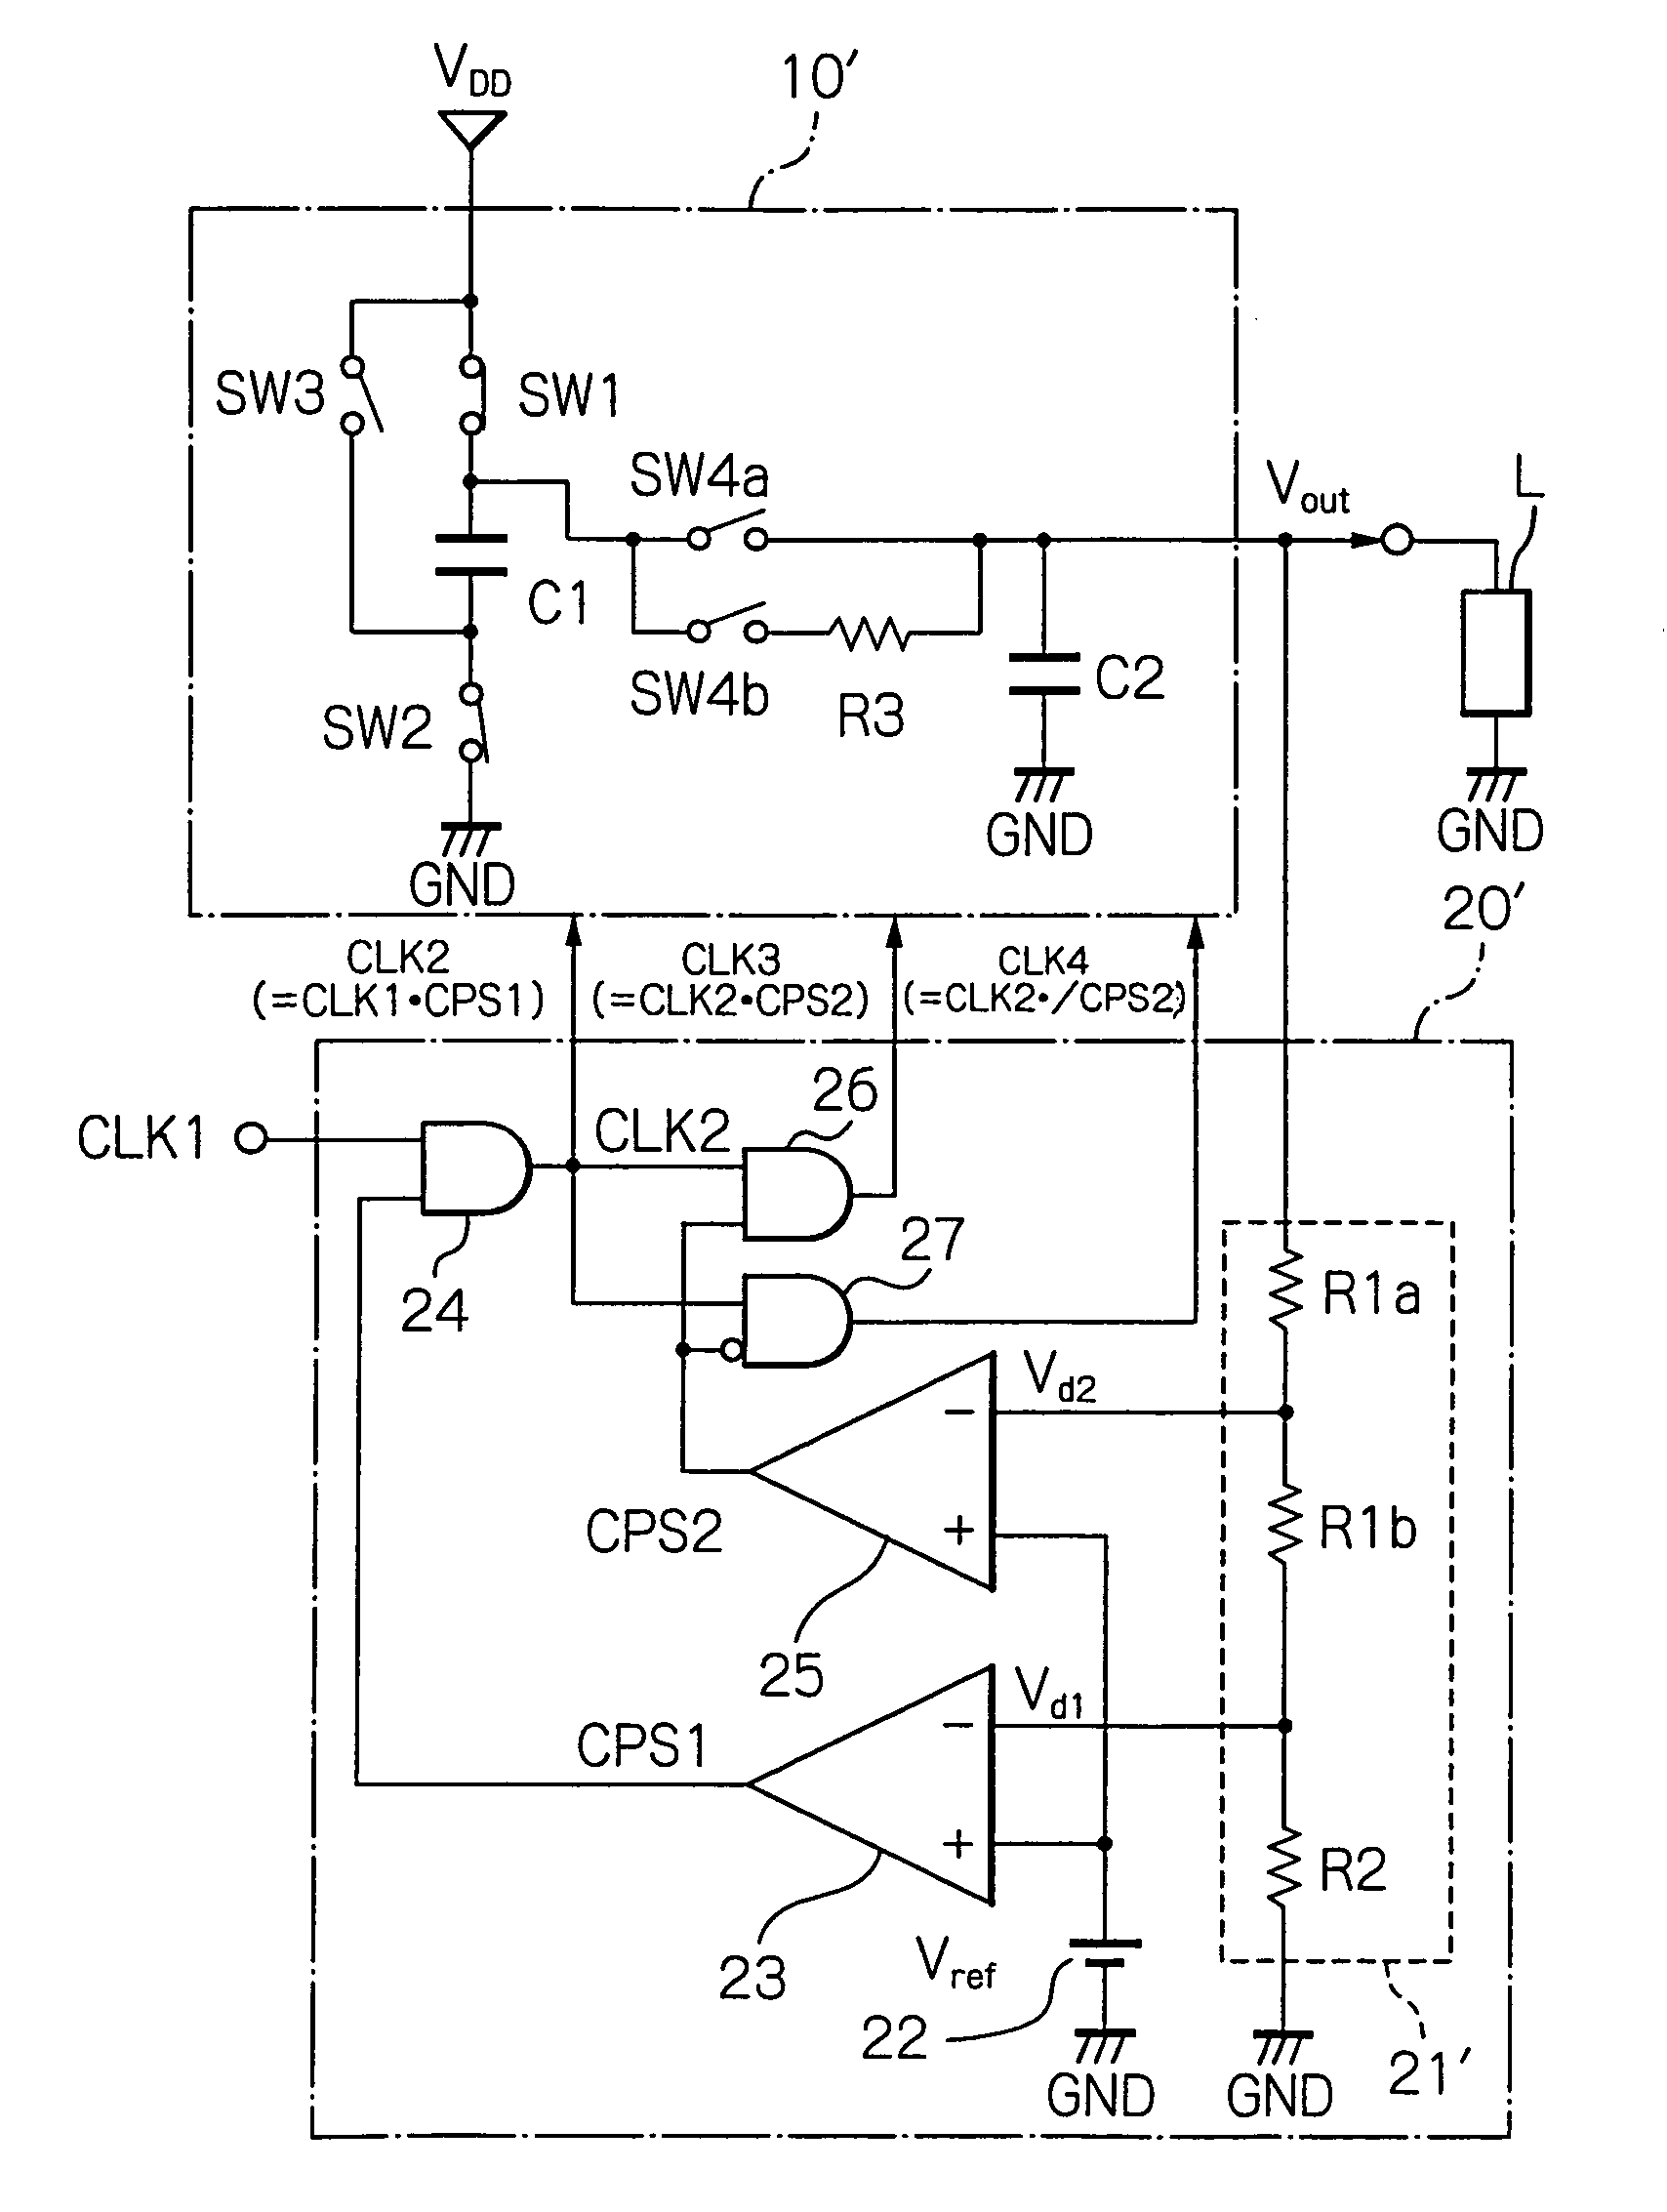 Power supply apparatus including charge-pump type step-up circuit having different discharging time constants